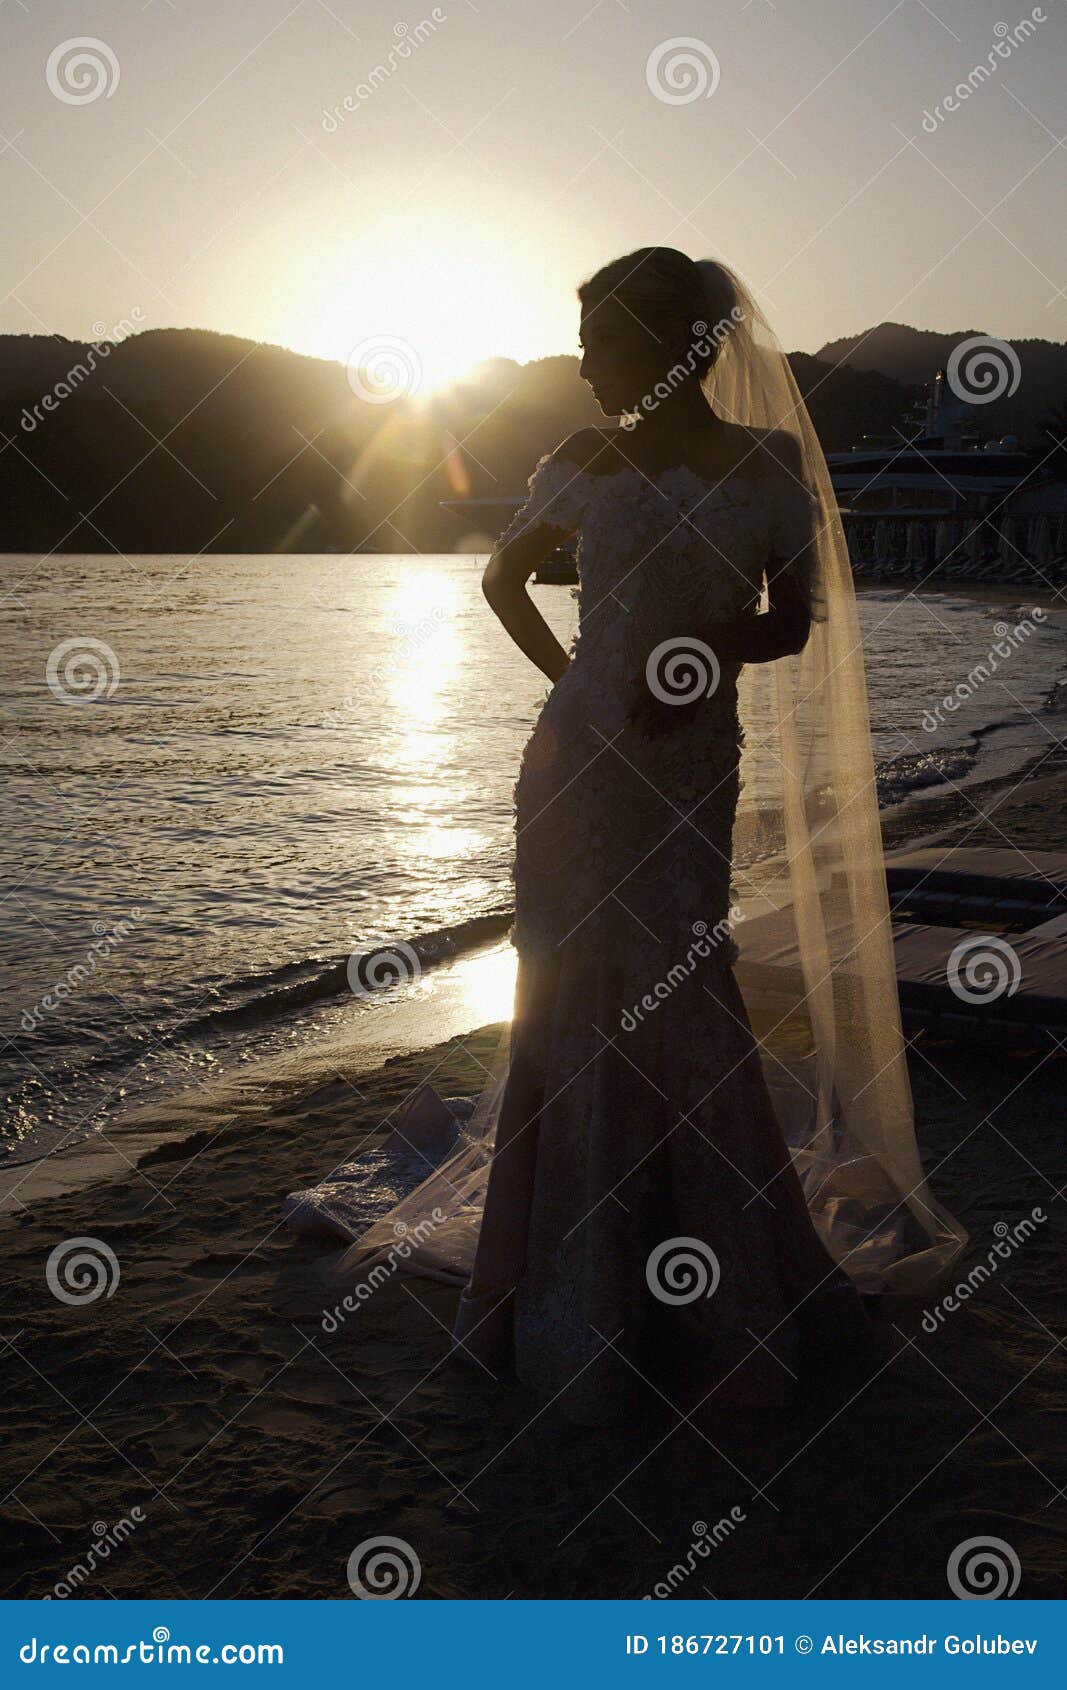 bride on ocean or sea at sunset on wedding day